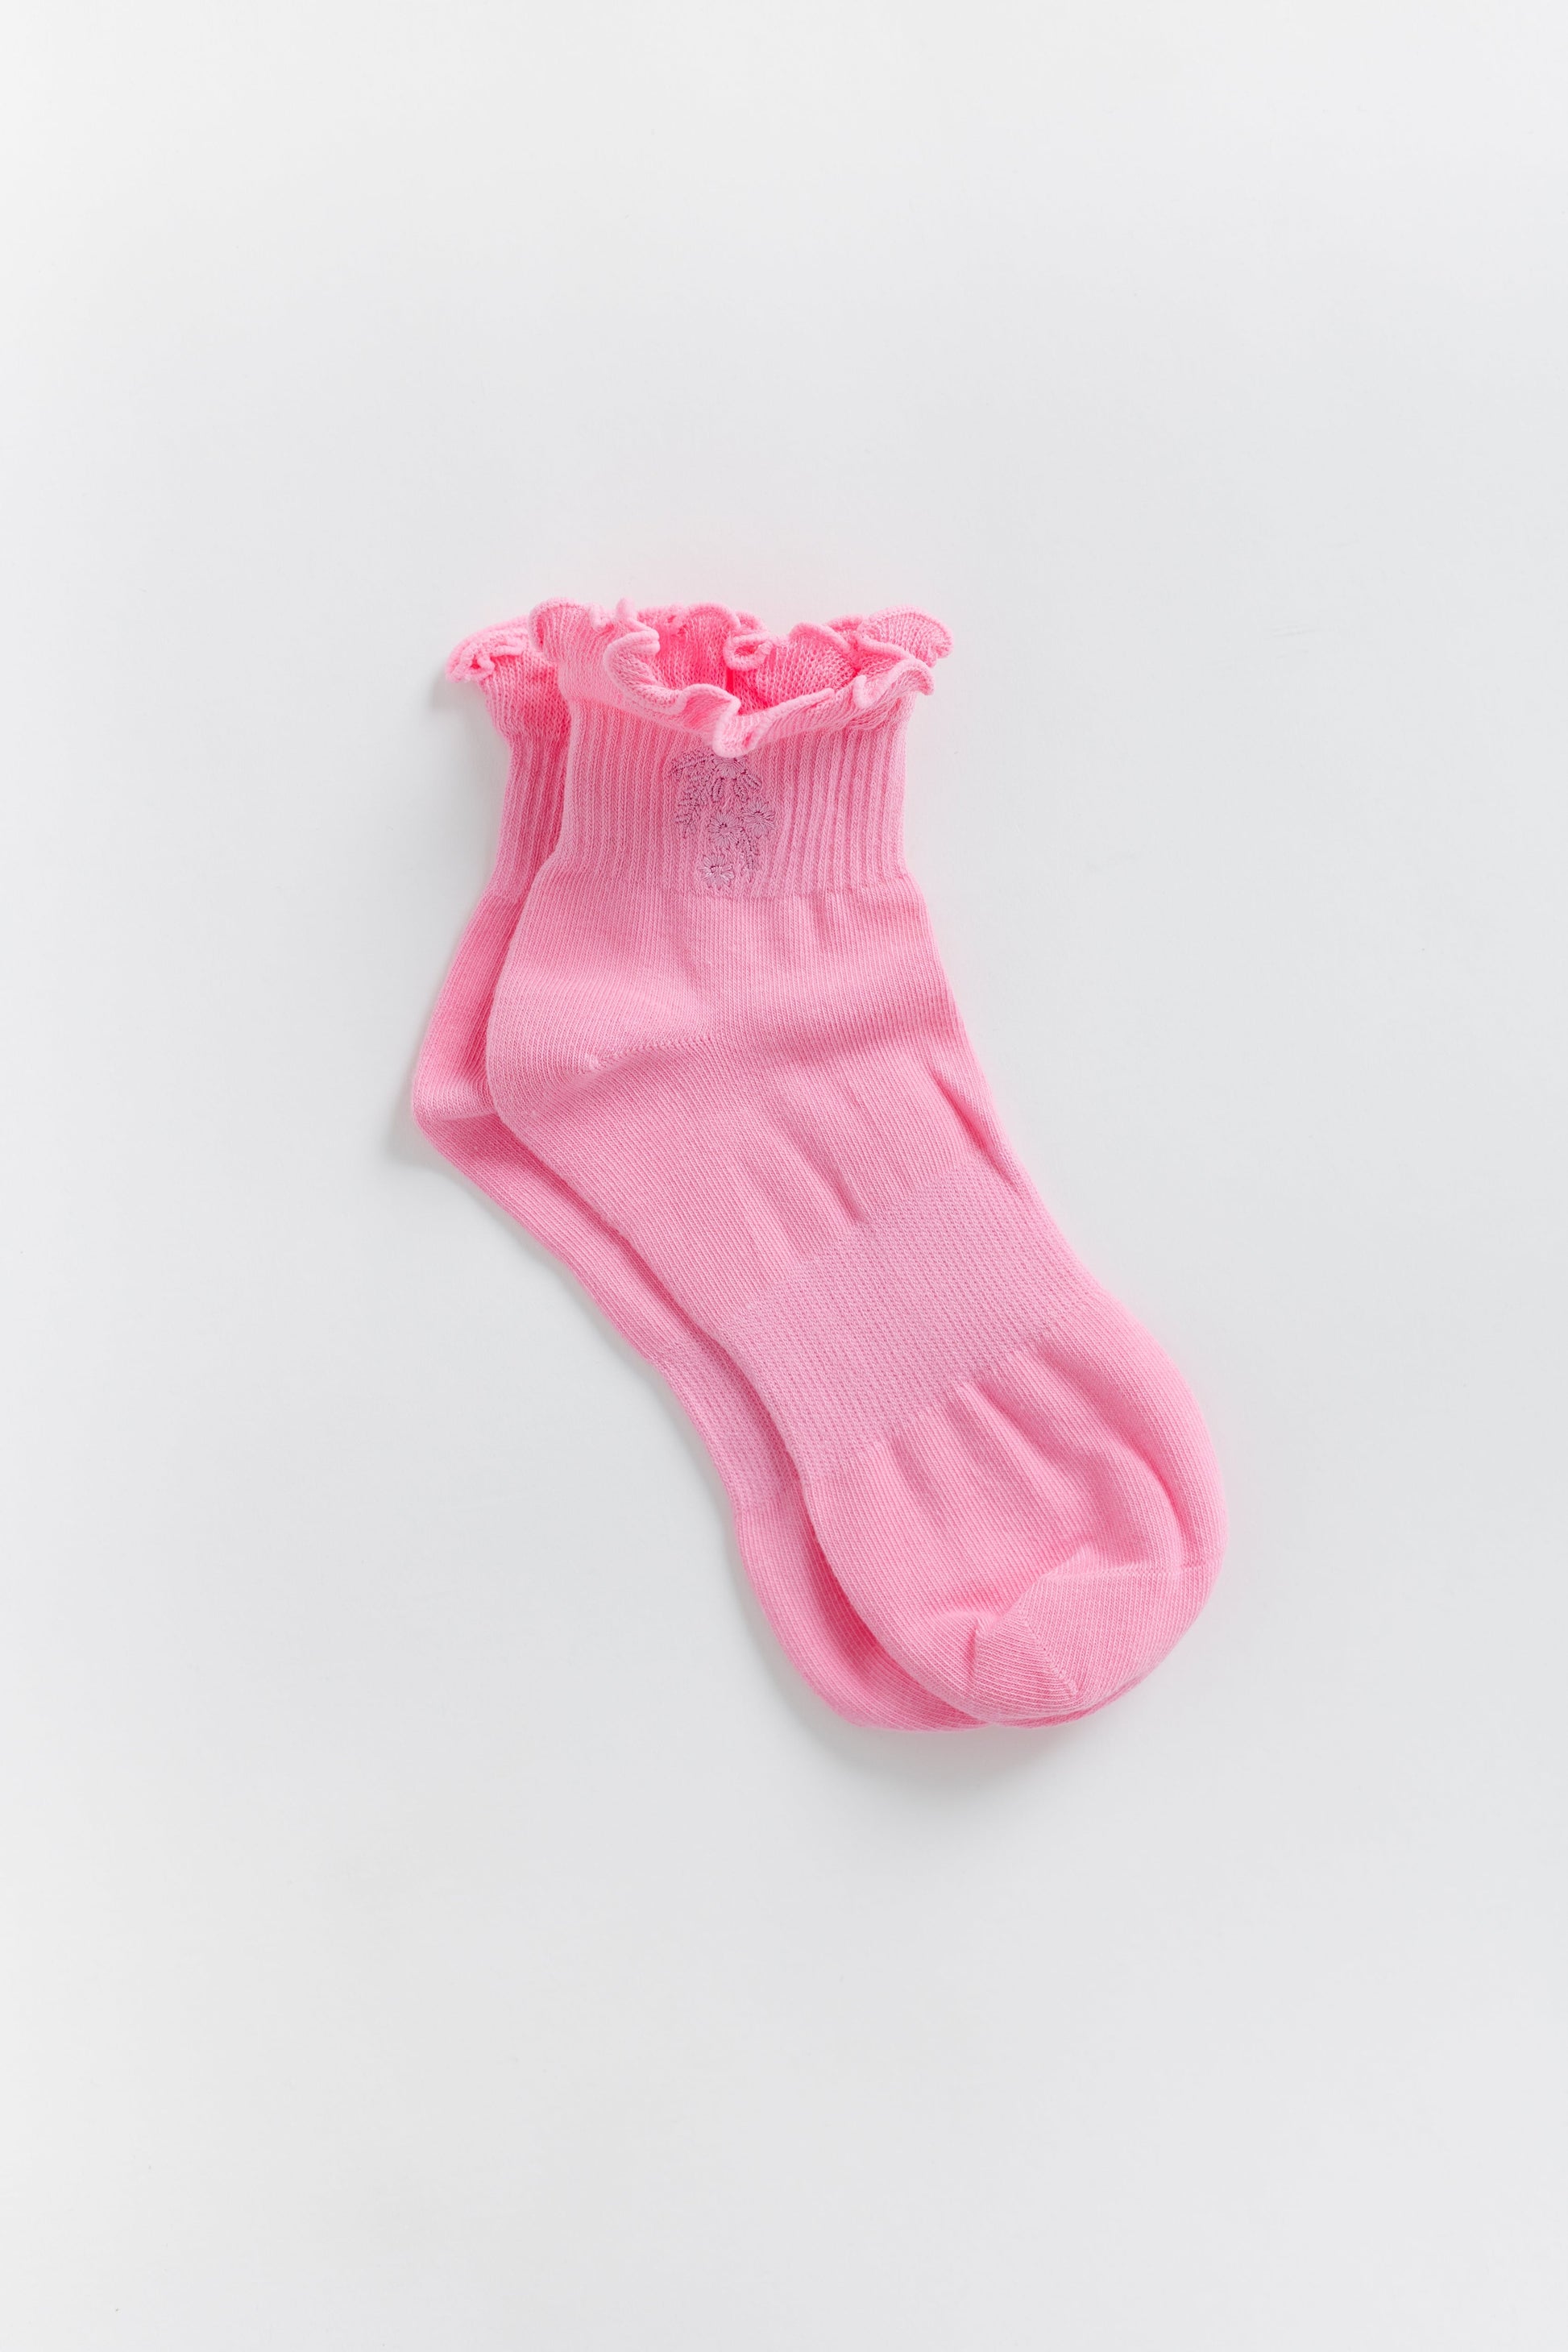 Cove Embroidered Ruffle Quarter WOMEN'S SOCKS Cove Accessories Bright Pink OS 